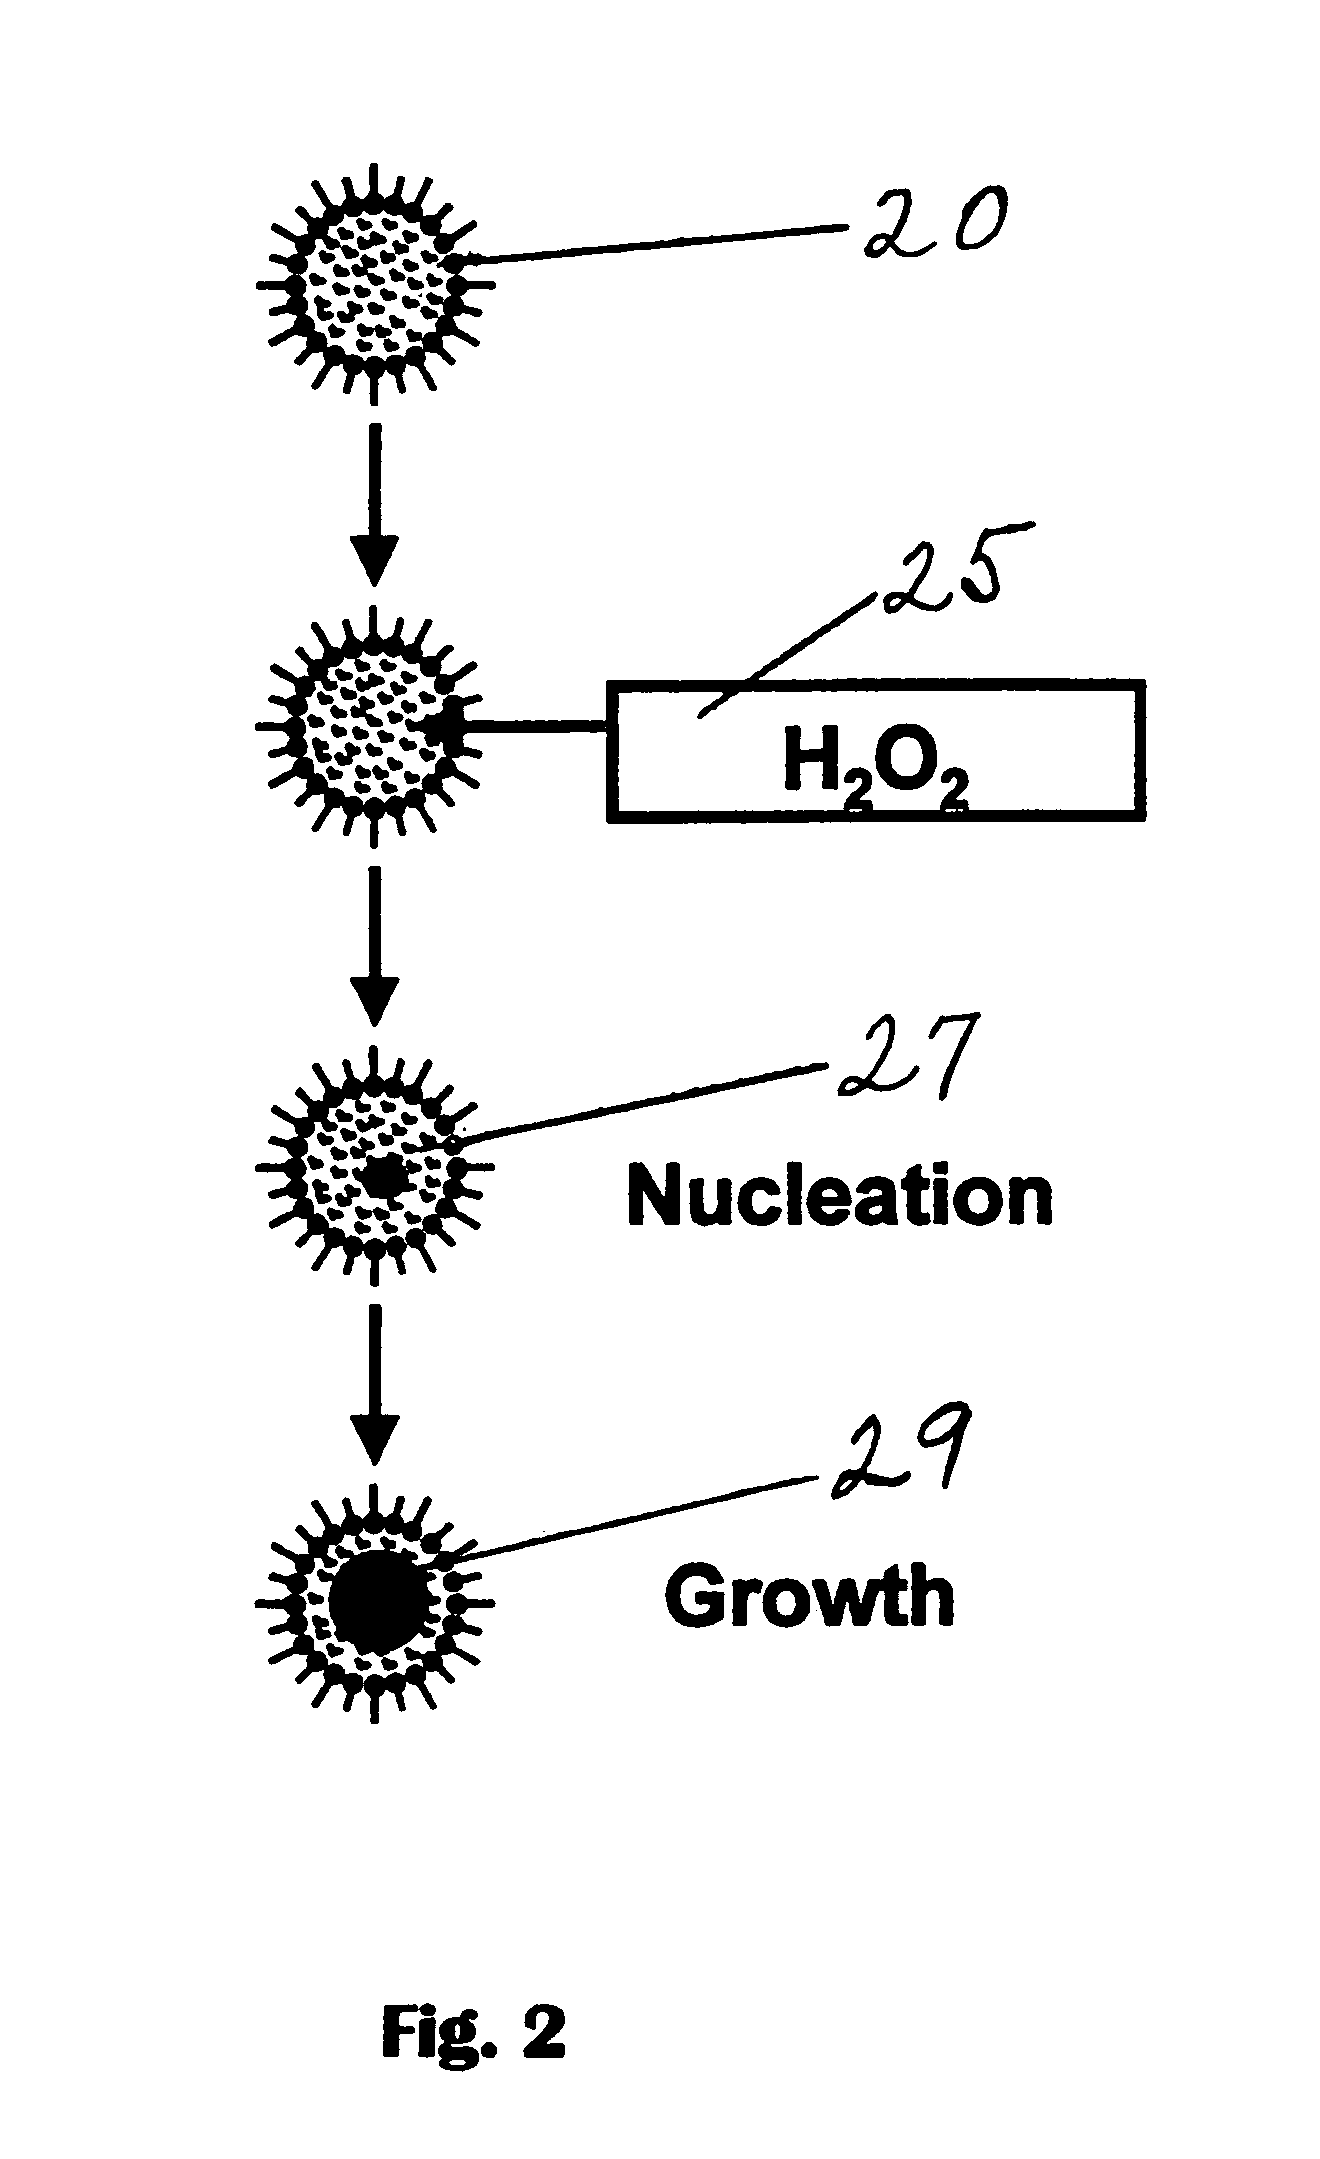 Use of oxide nanoparticles in soot reduction